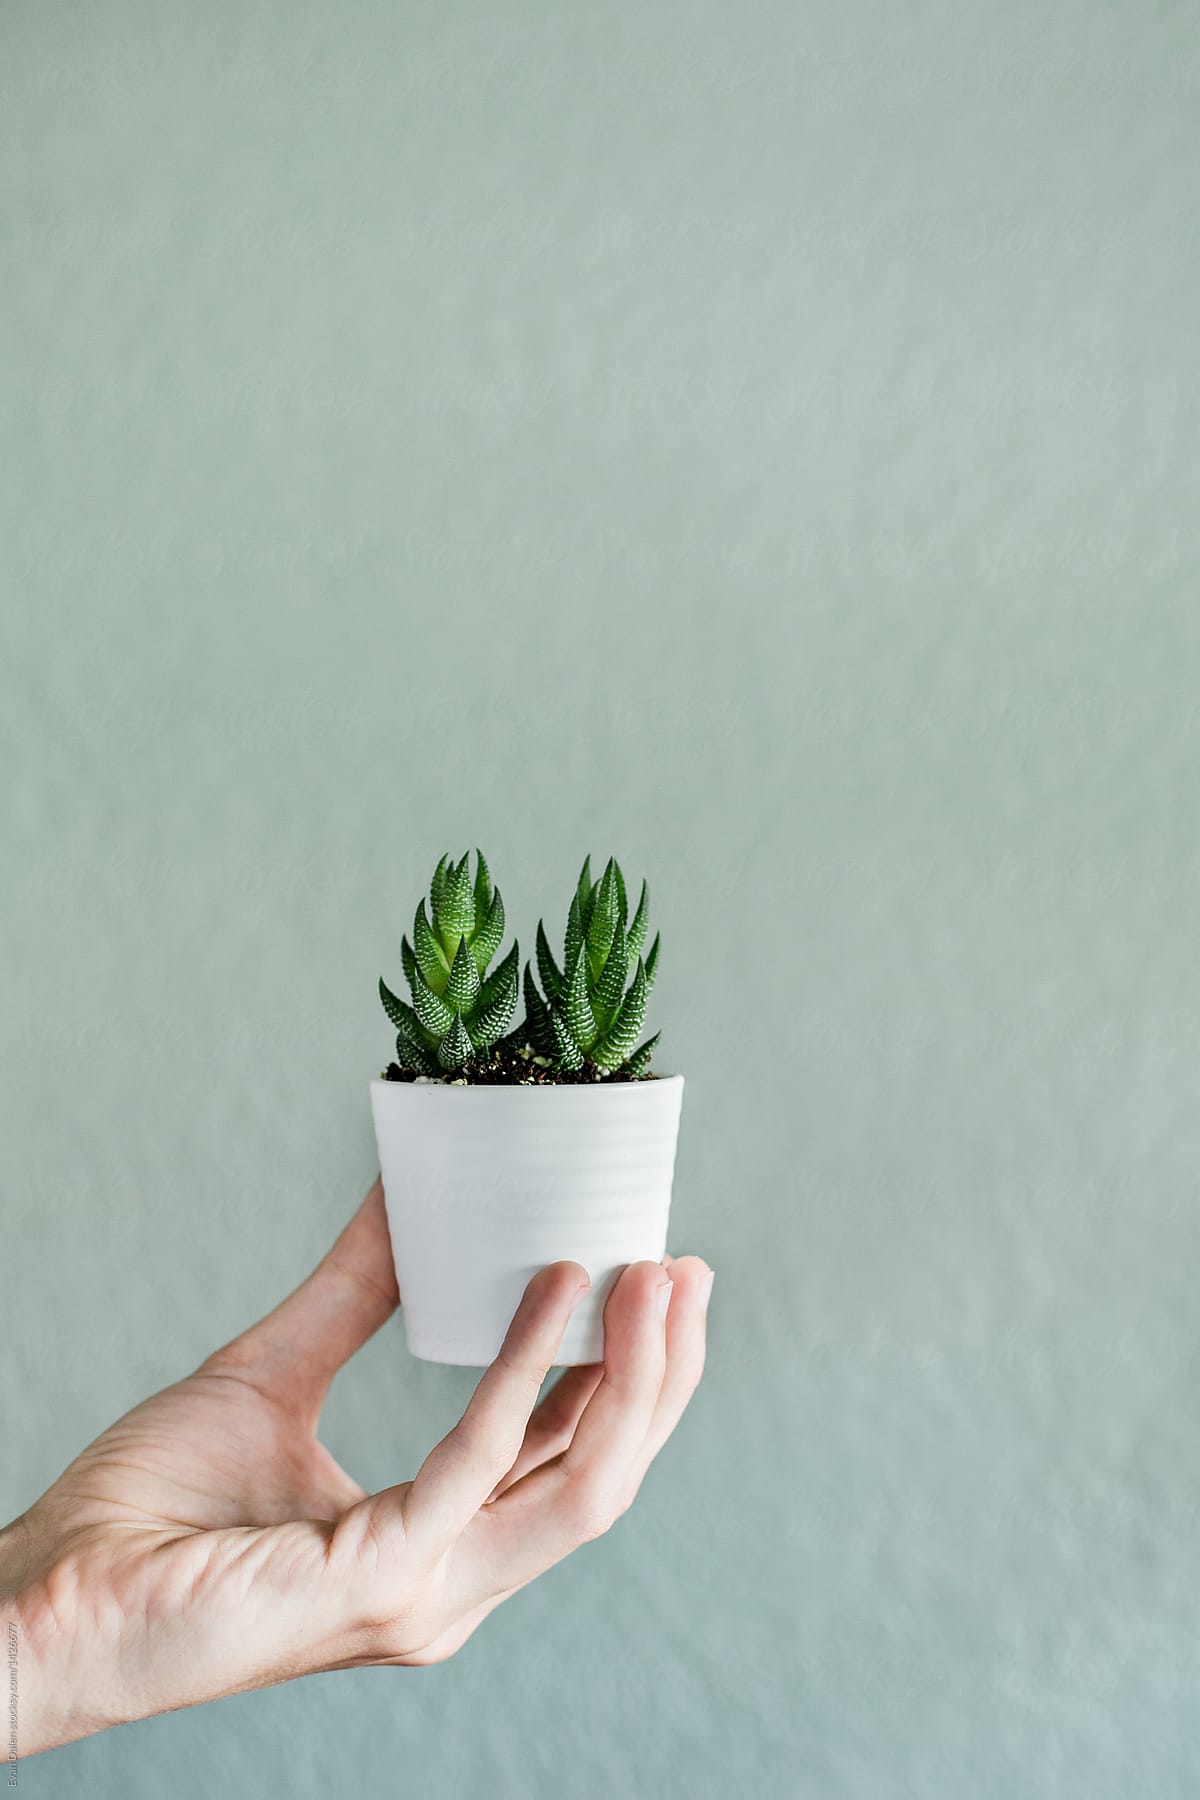 Small Succulent Being Held In White Pot.